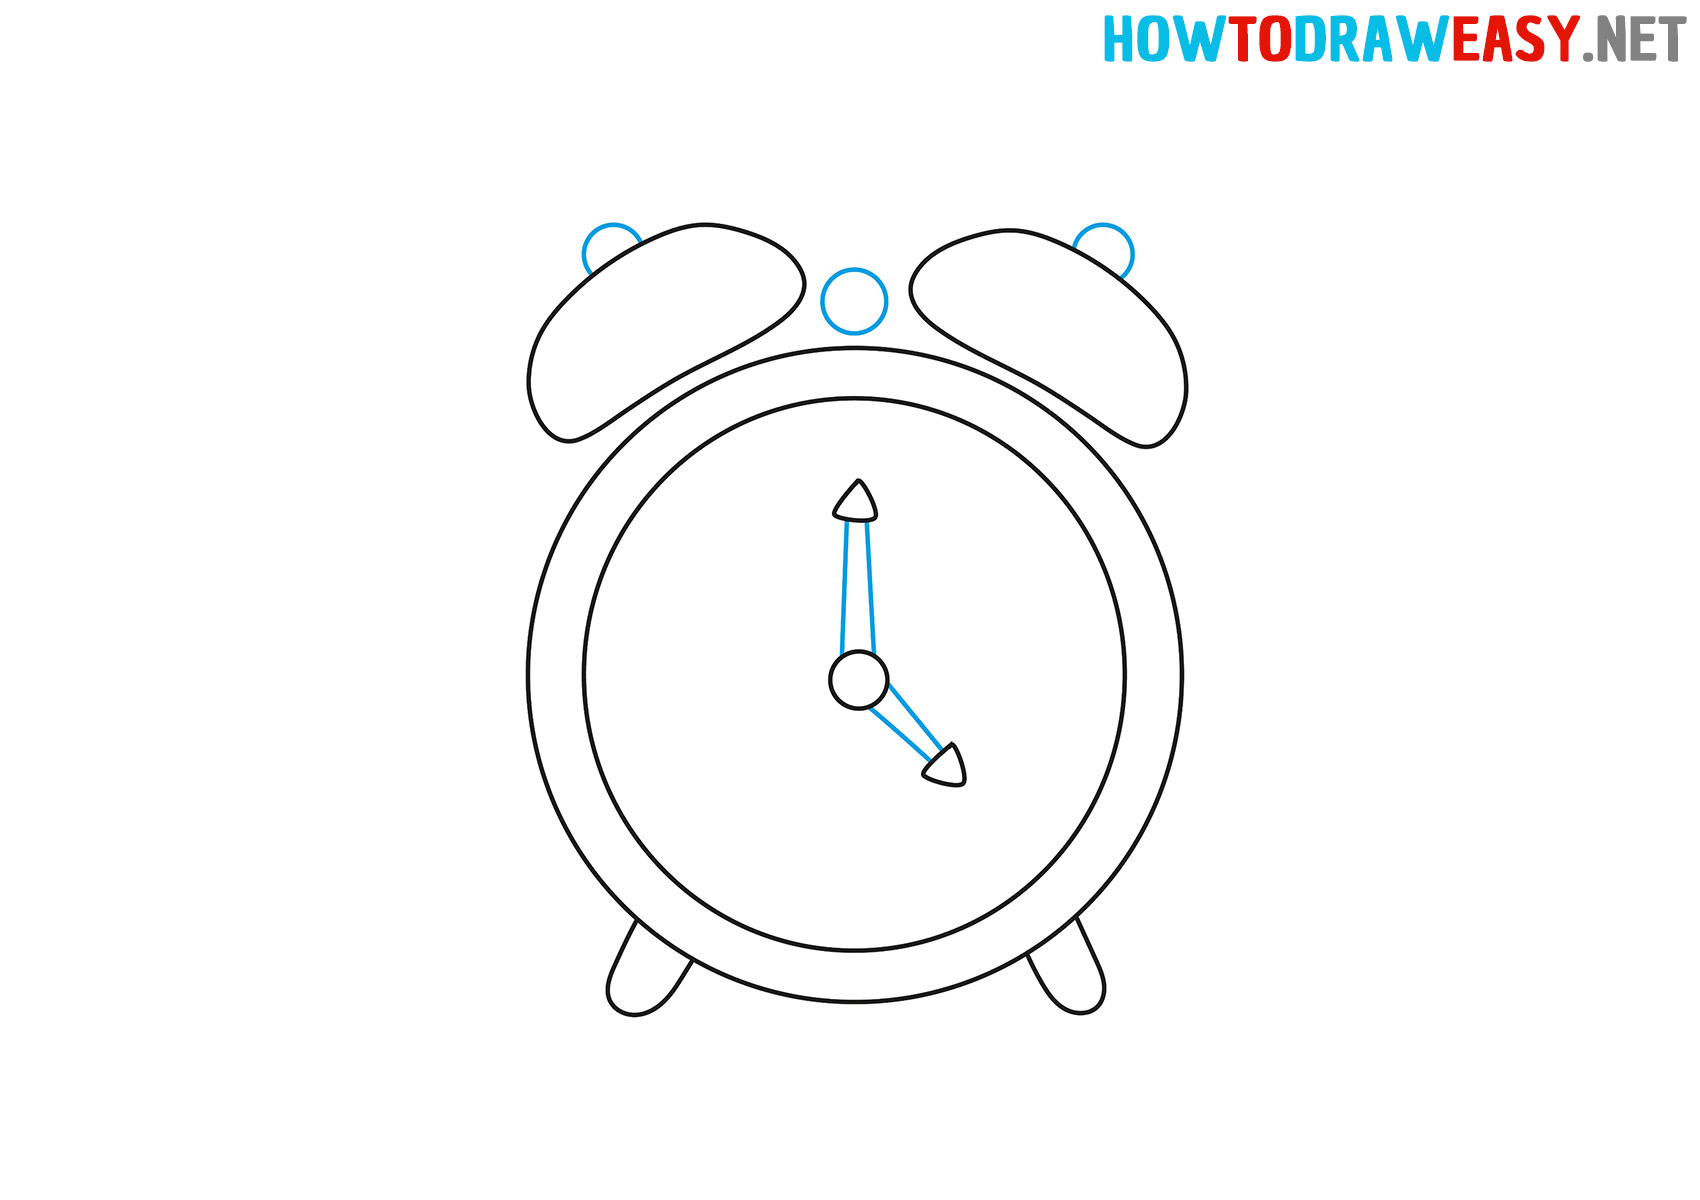 How to Draw an Easy Alarm Clock